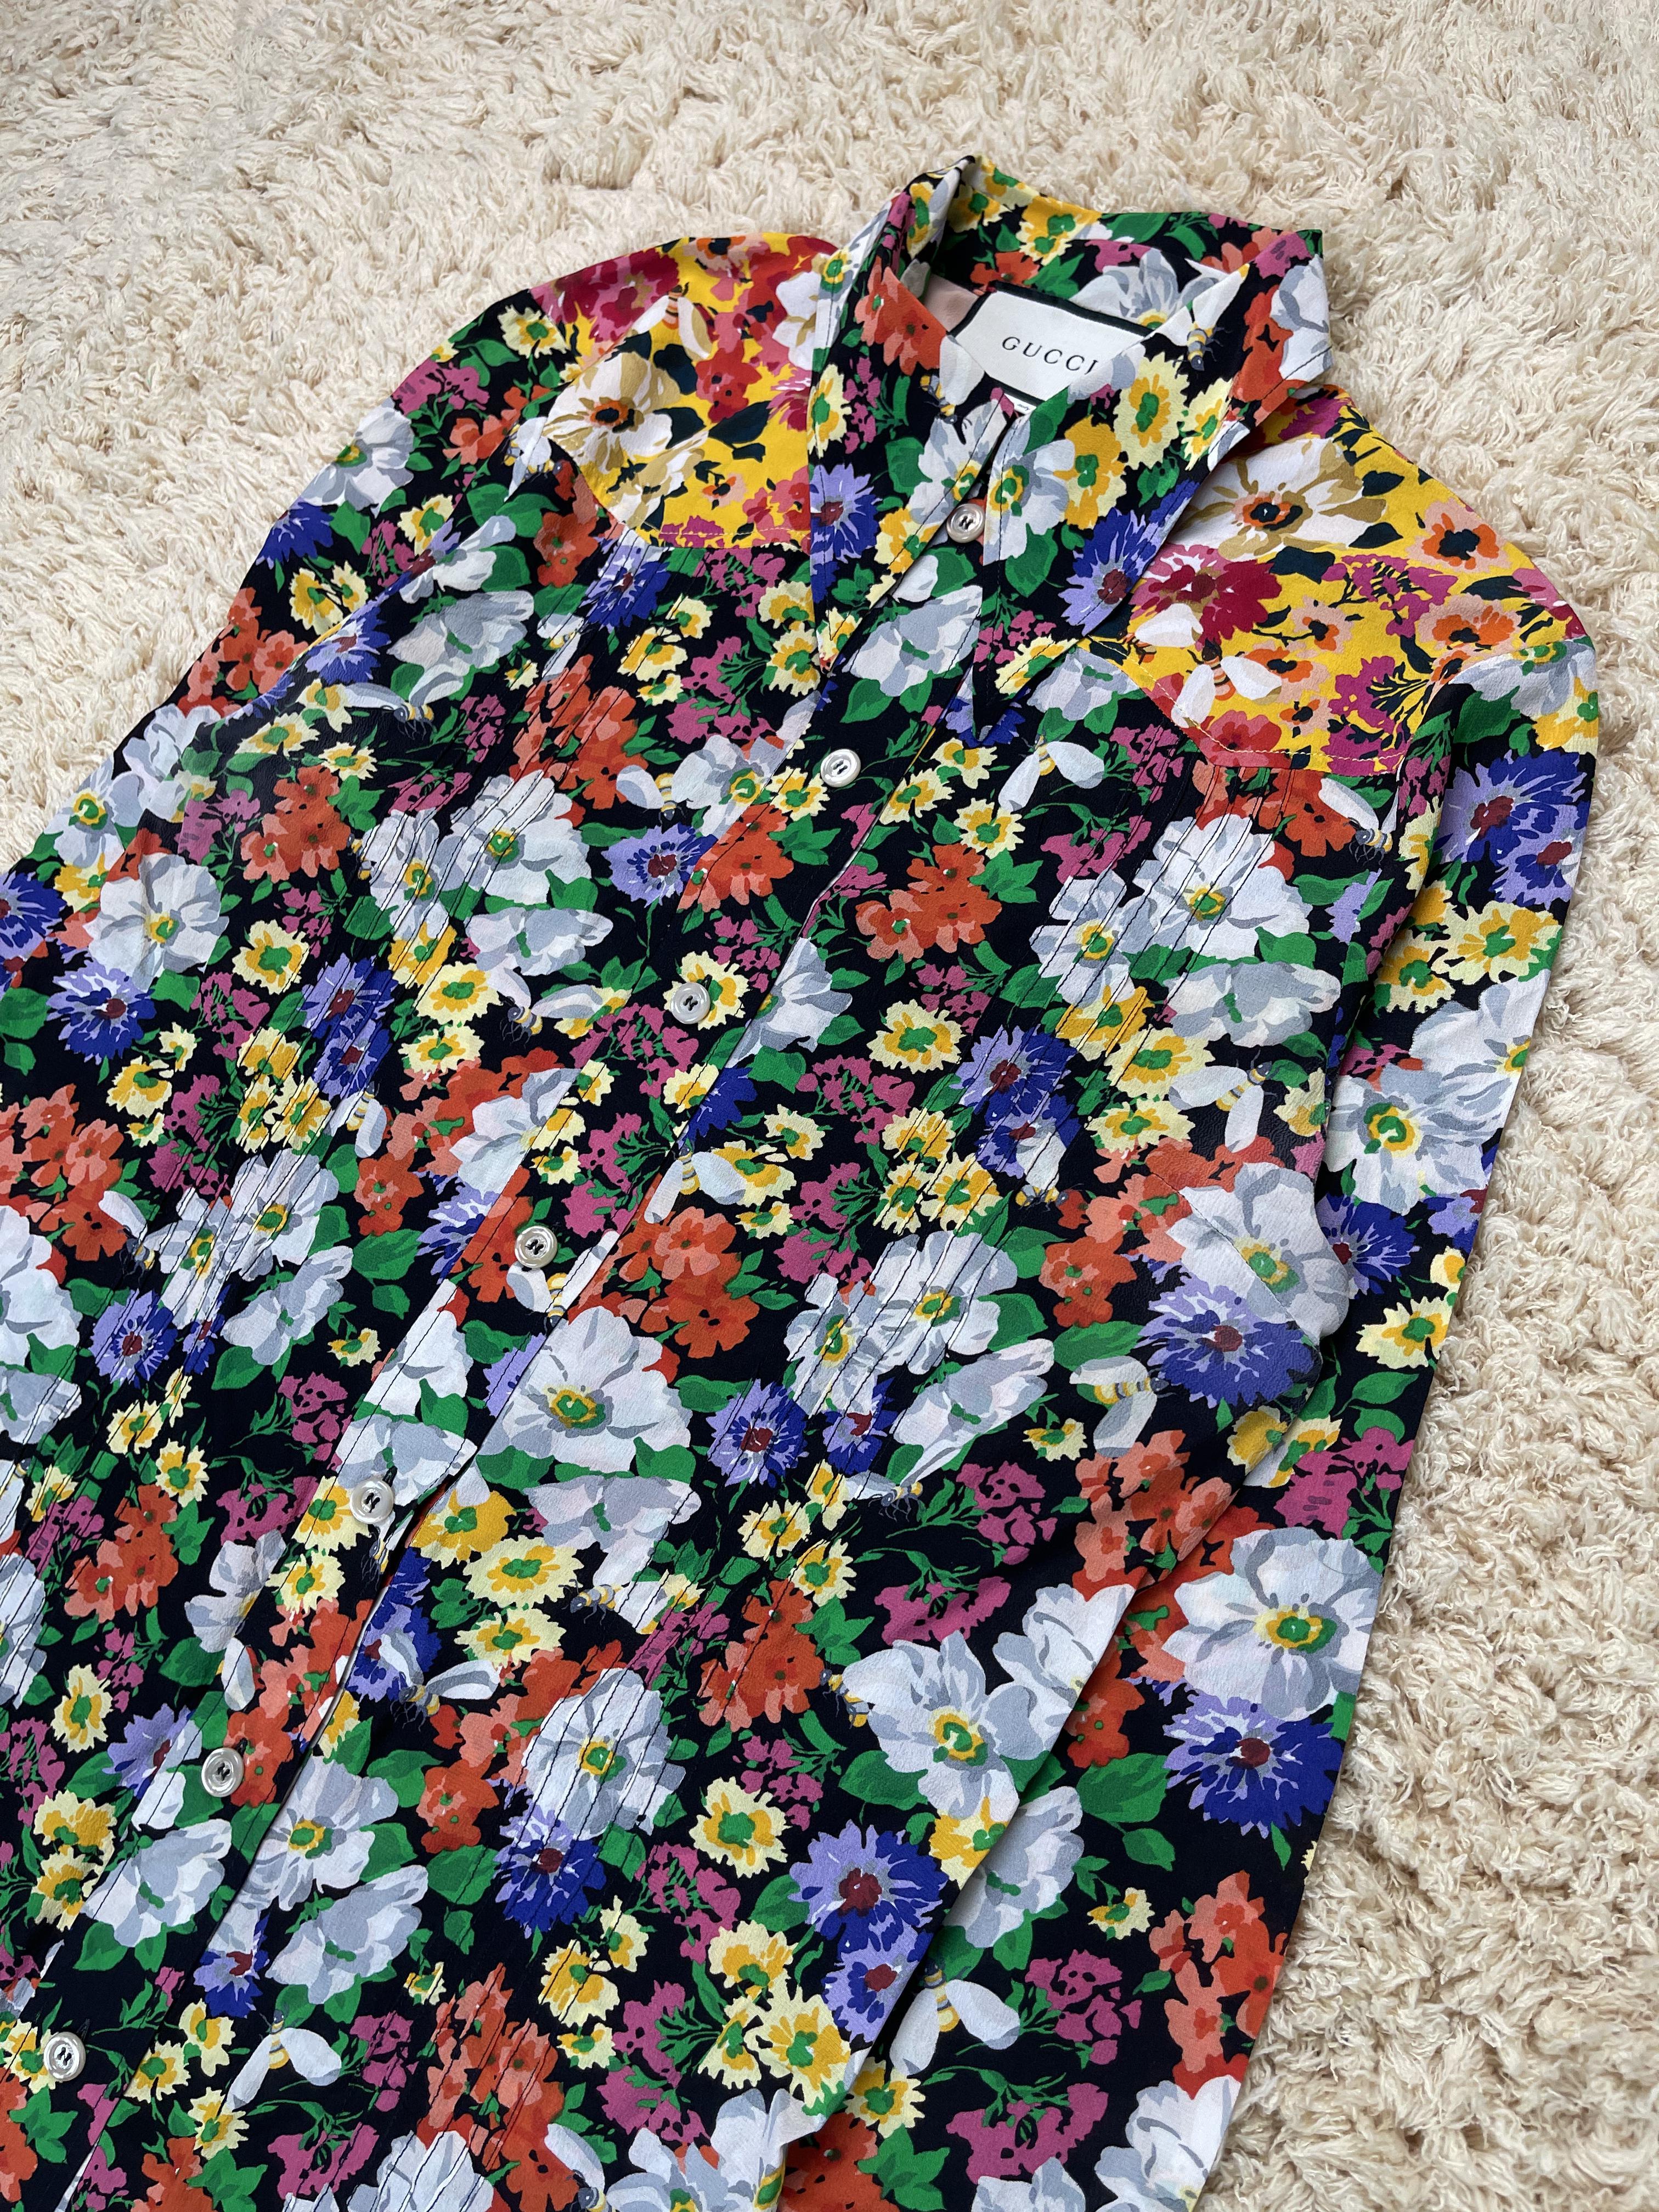 Floral gucci shirt, the shirt was originally designed for womenswear by Alessandro Michelle, the season is around 2017 - 2018 as showed on washtag.

Condition: 8/10. In relatively good condition with no minor flaws.

Size: Not listed, fits like a